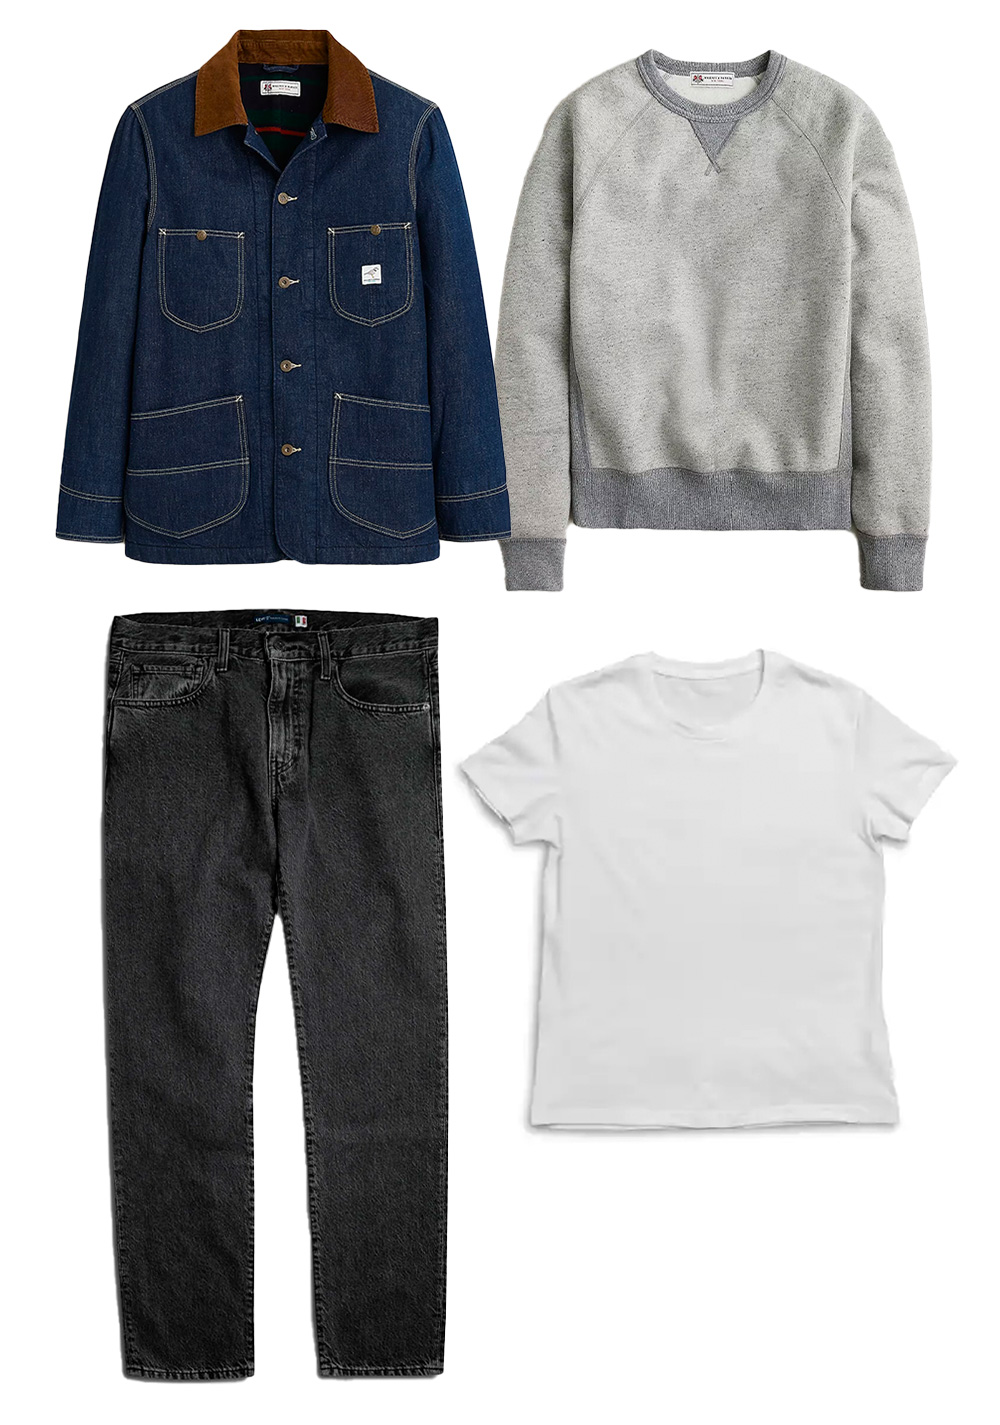 Four clothing items: a blue denim jacket with brown collar, a gray sweatshirt, dark gray jeans, and a white t-shirt